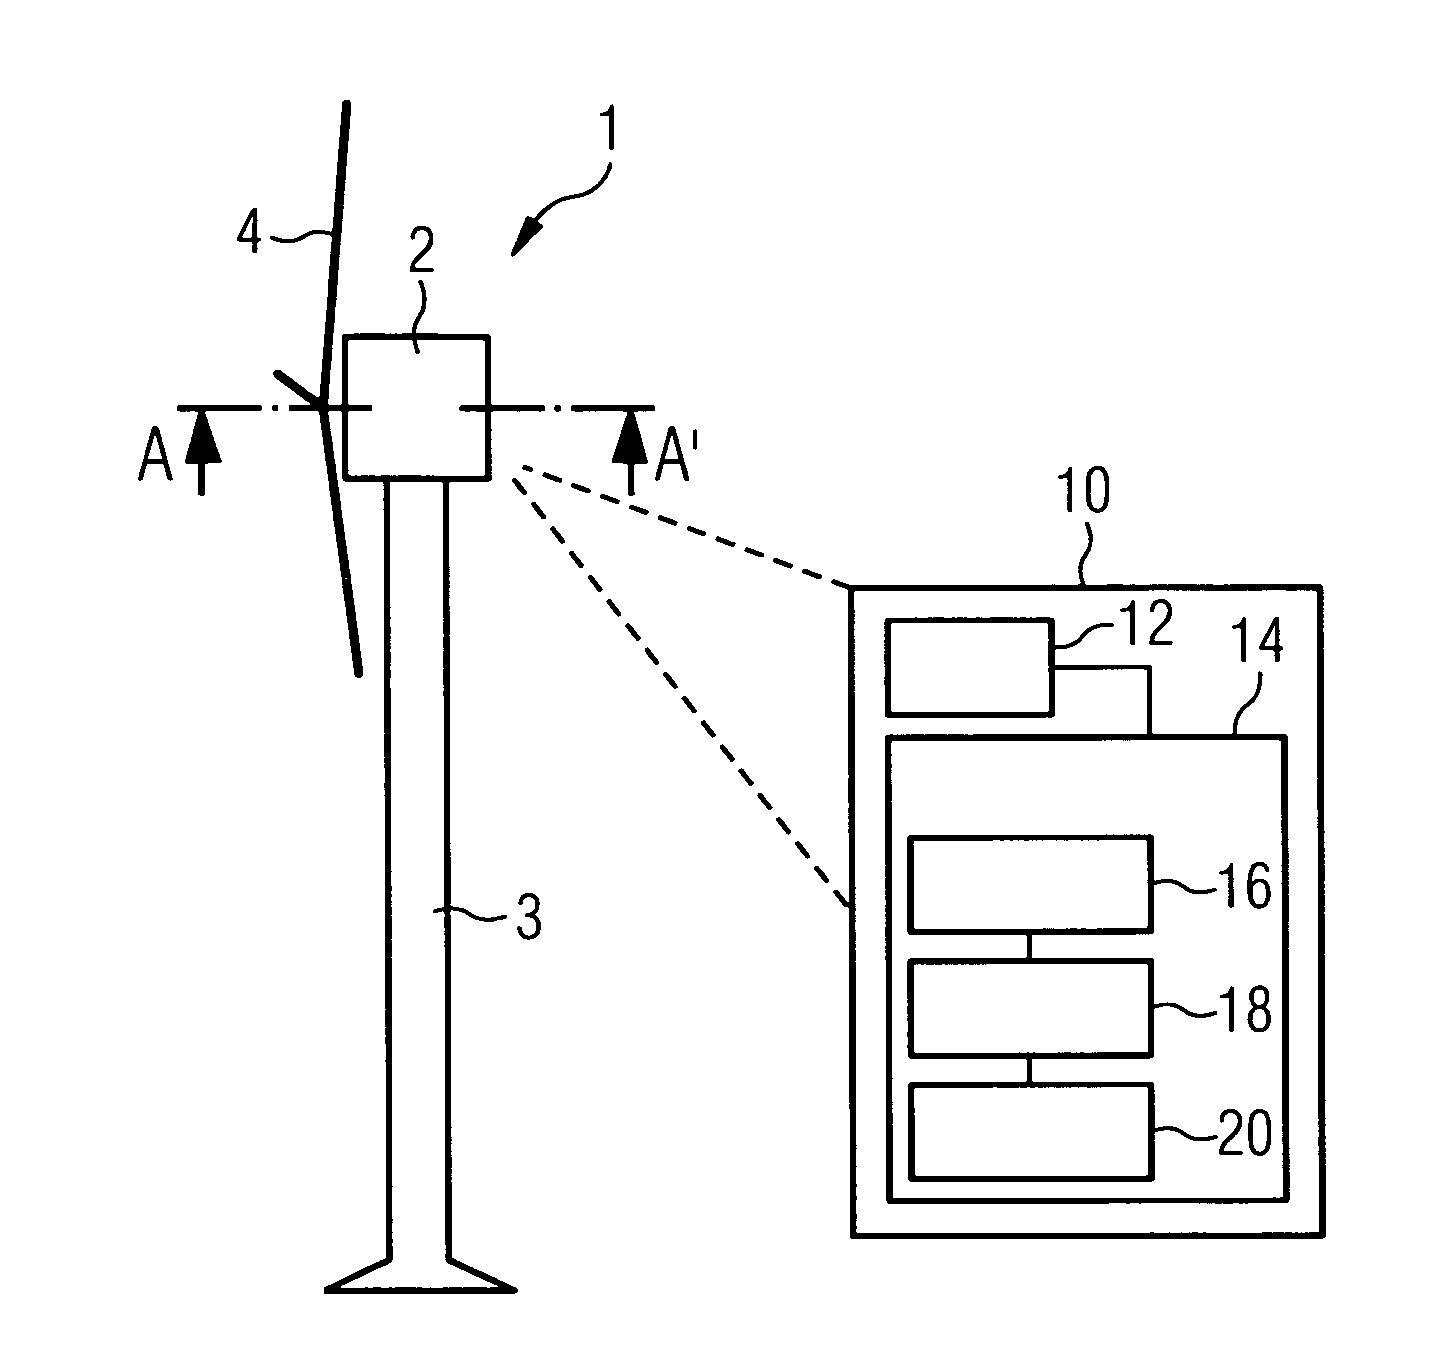 Apparatus and method for determining a resonant frequency of a wind turbine tower